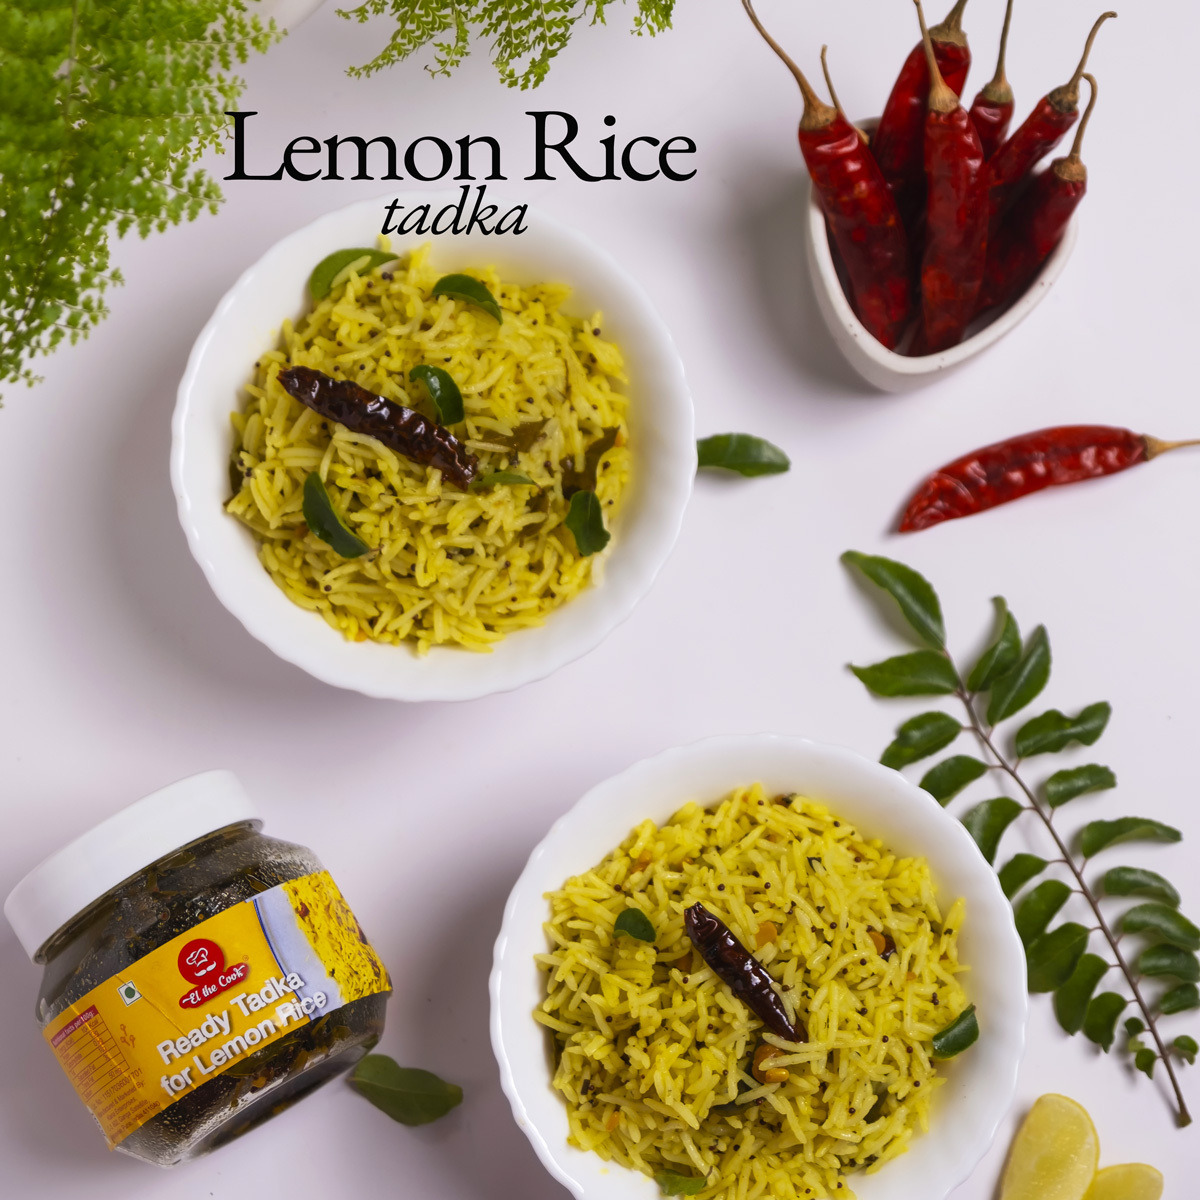 EL The Cook Ready-to-Use Tadka(CONCENTRATE Whole Spice Tempering) for Spicy Lemon Rice, Indian Rice Seasoning, Super Saver Jar Pack, 6.34oz, Vegan, Gluten-Free (Flavor: Lemon Rice)